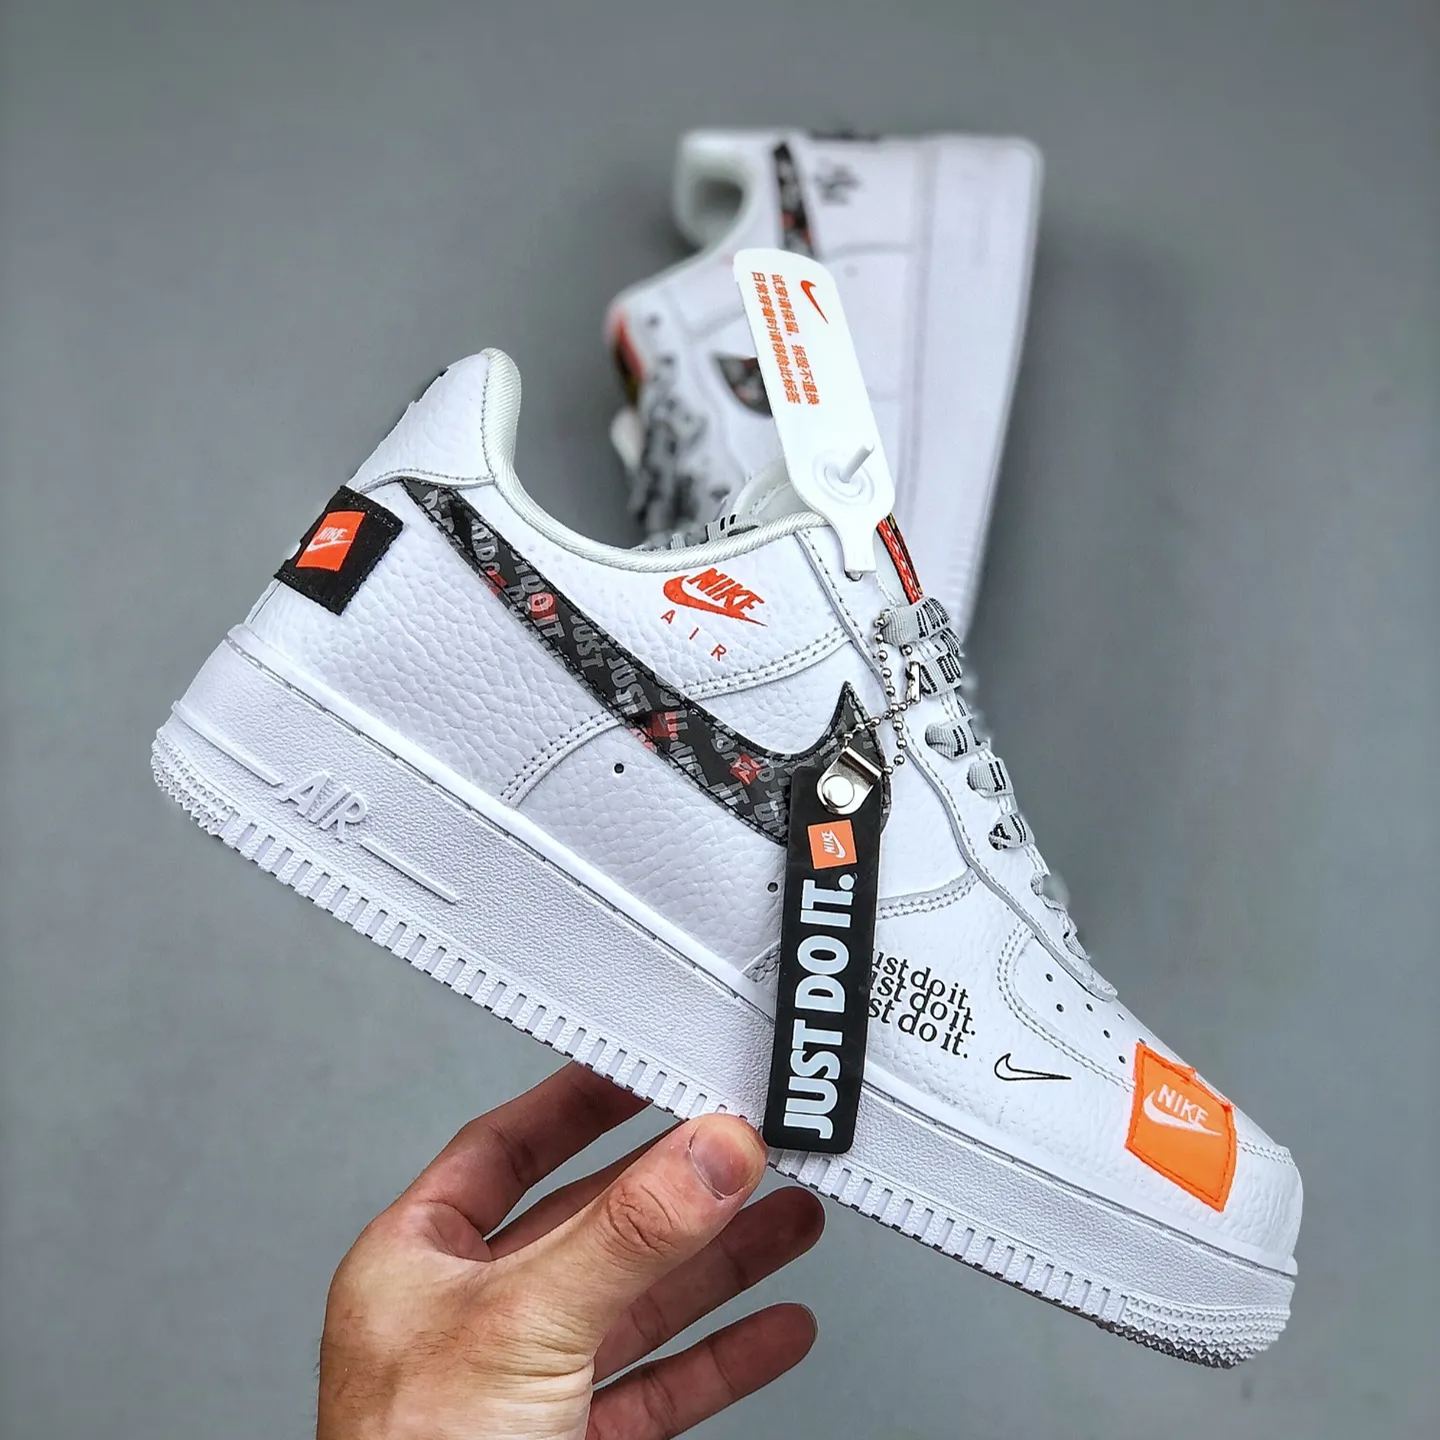 Nike Air Force 1 Low Premium Low Just Do It "White"